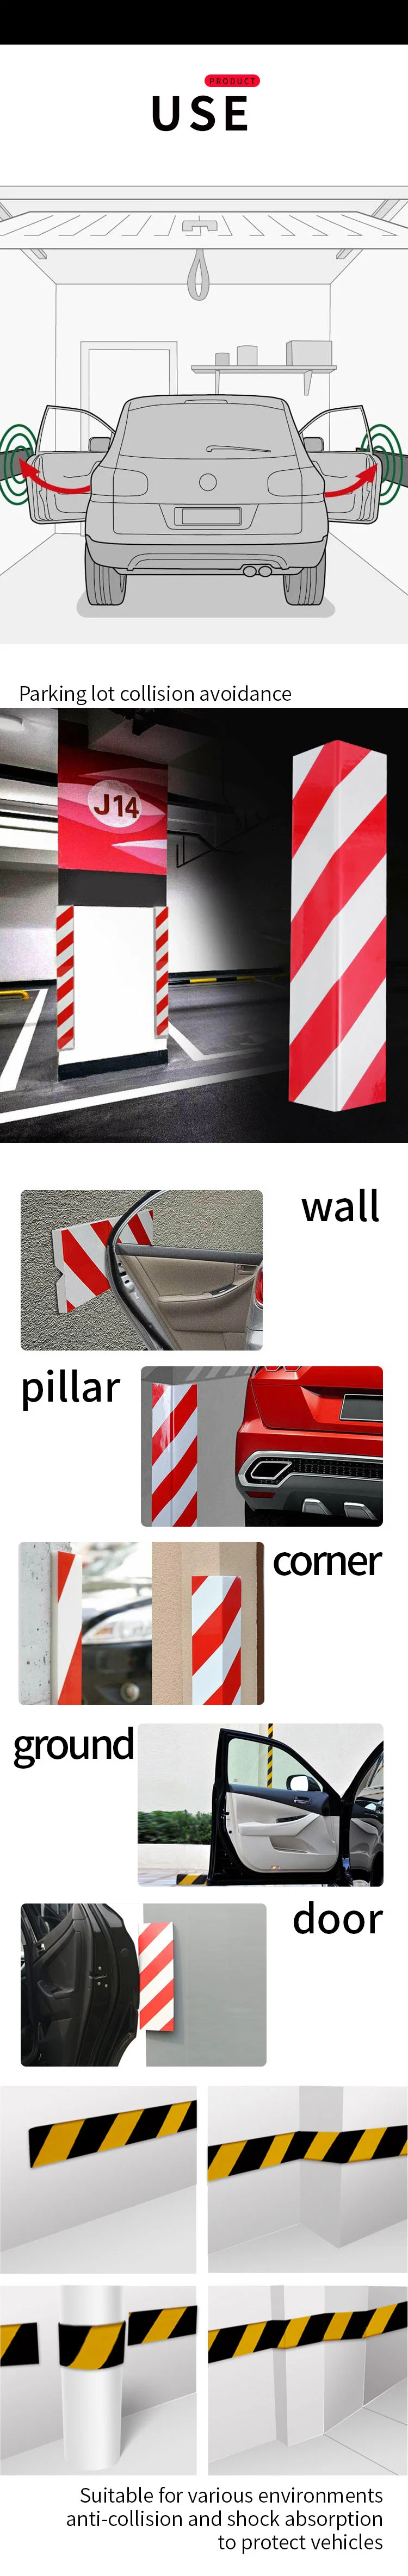 Anti Shock White/Red Self-Adhesive Corner Guards Made of Foam Rubber to Protect Car Parks